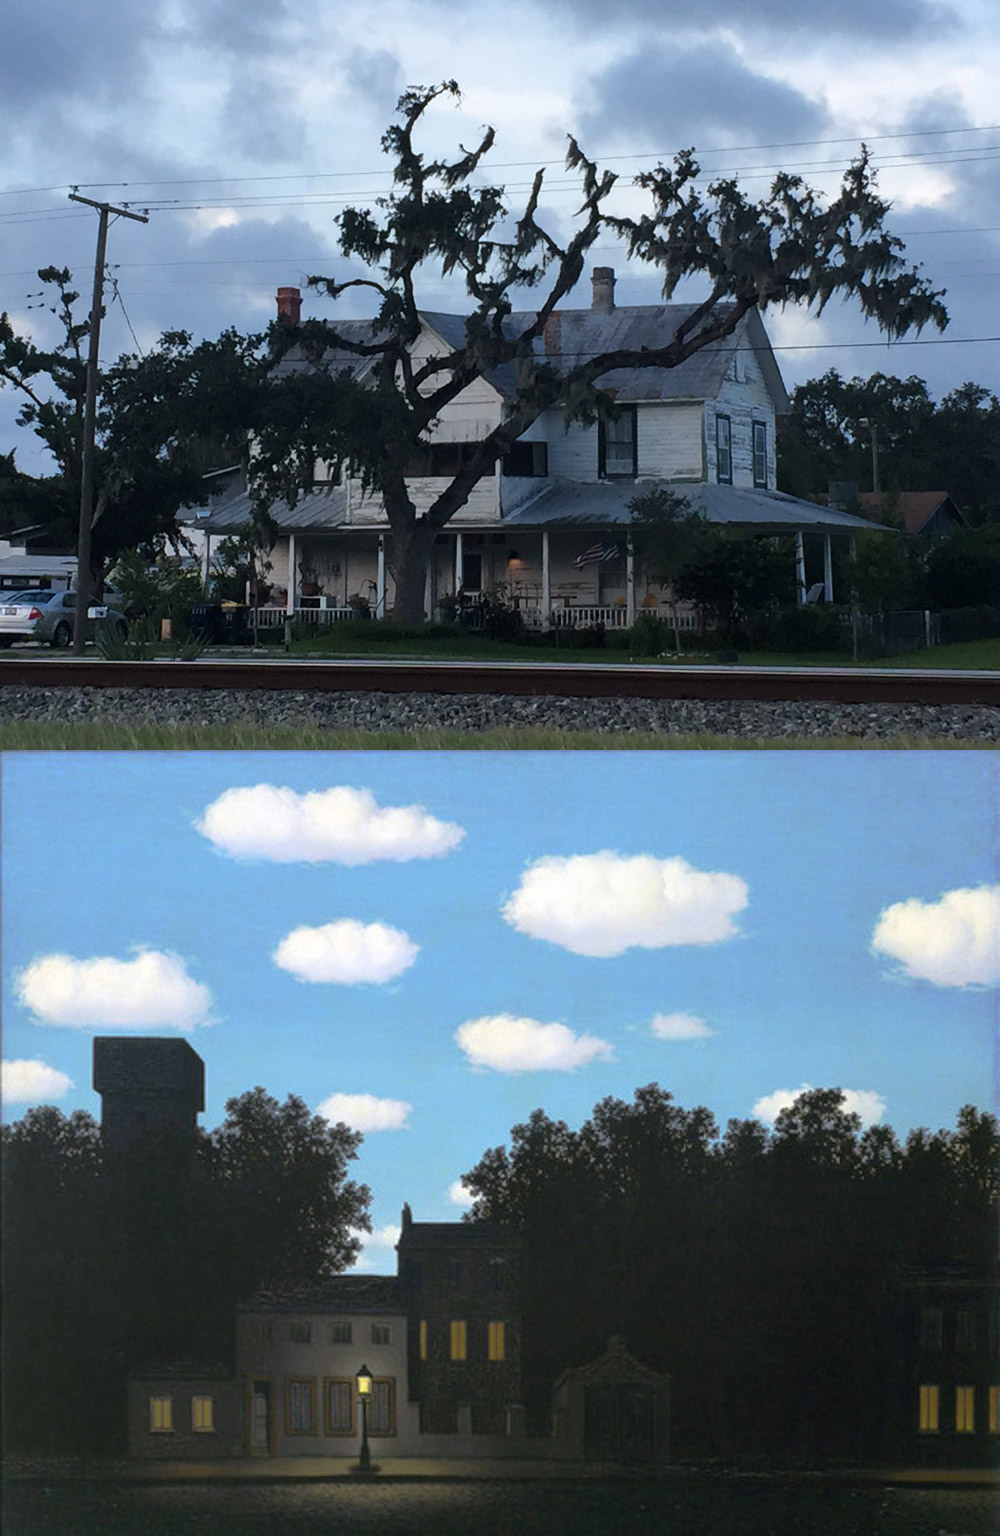 Magritte in Bunnell: top, a house on Railroad Street. Bottom, Magritte's 'Empire of Light,' from 1898. Click on the image for larger view. (© FlaglerLive)